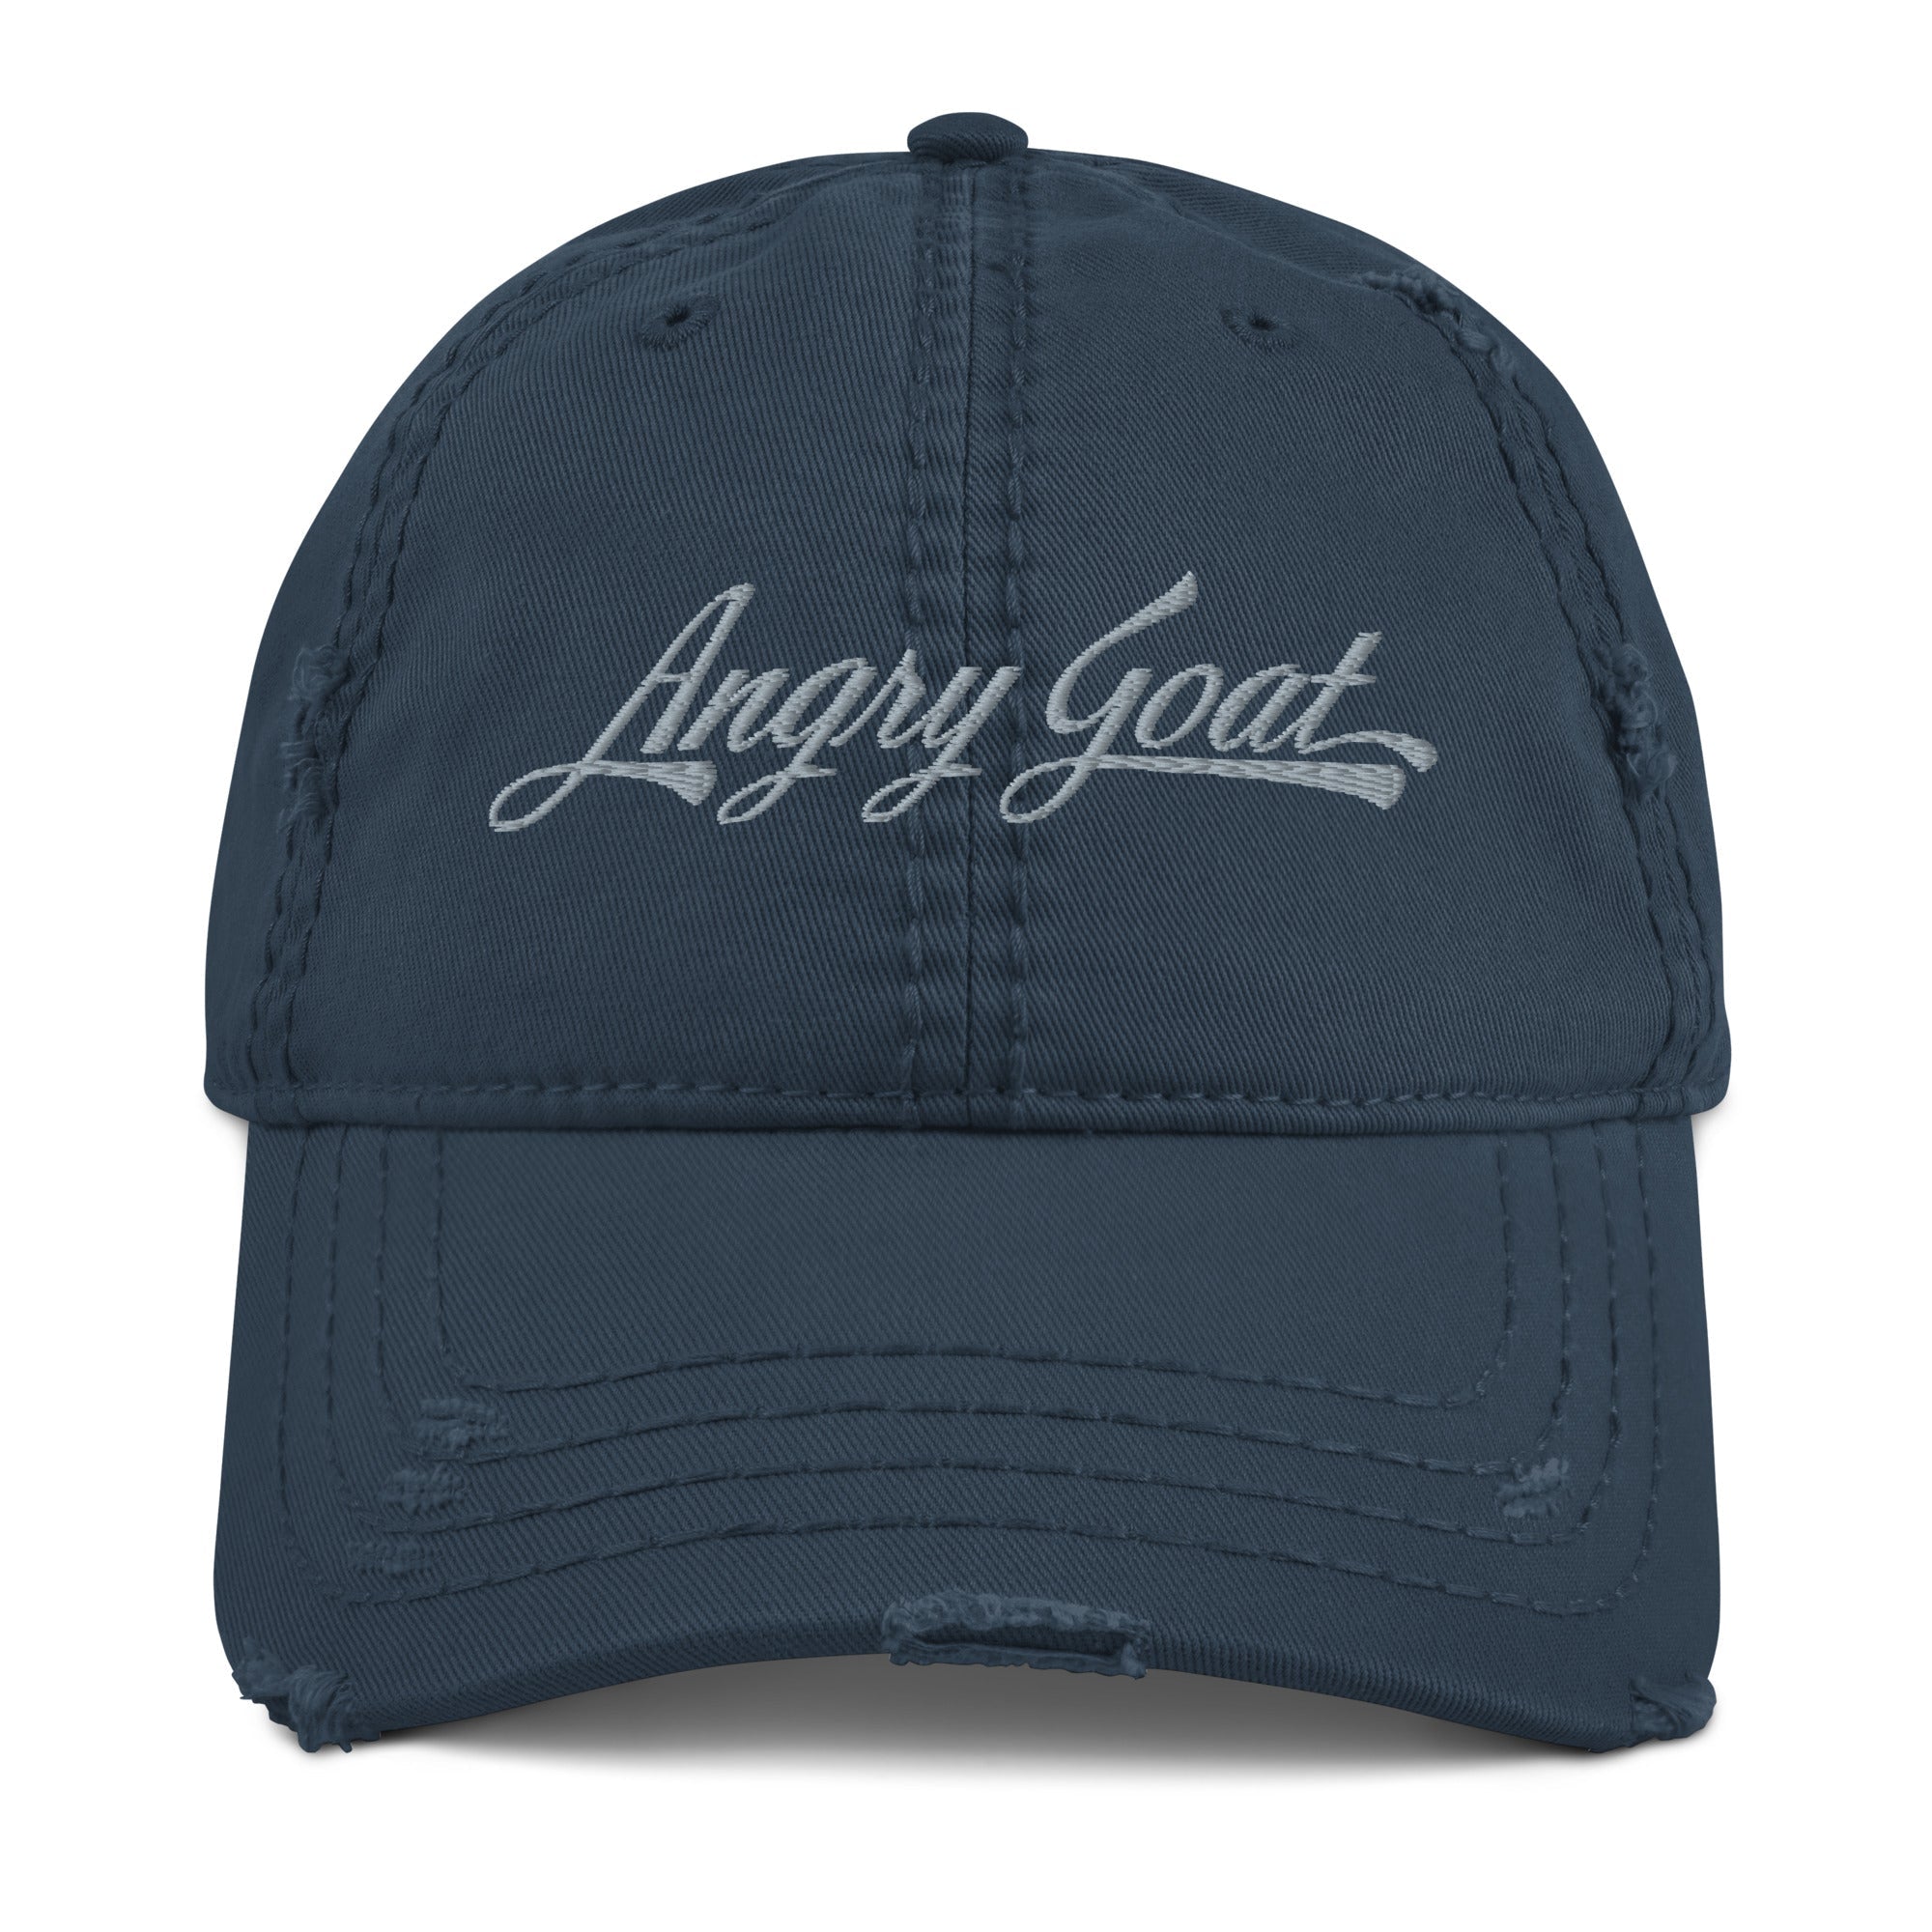 Angry Goat Distressed Hat